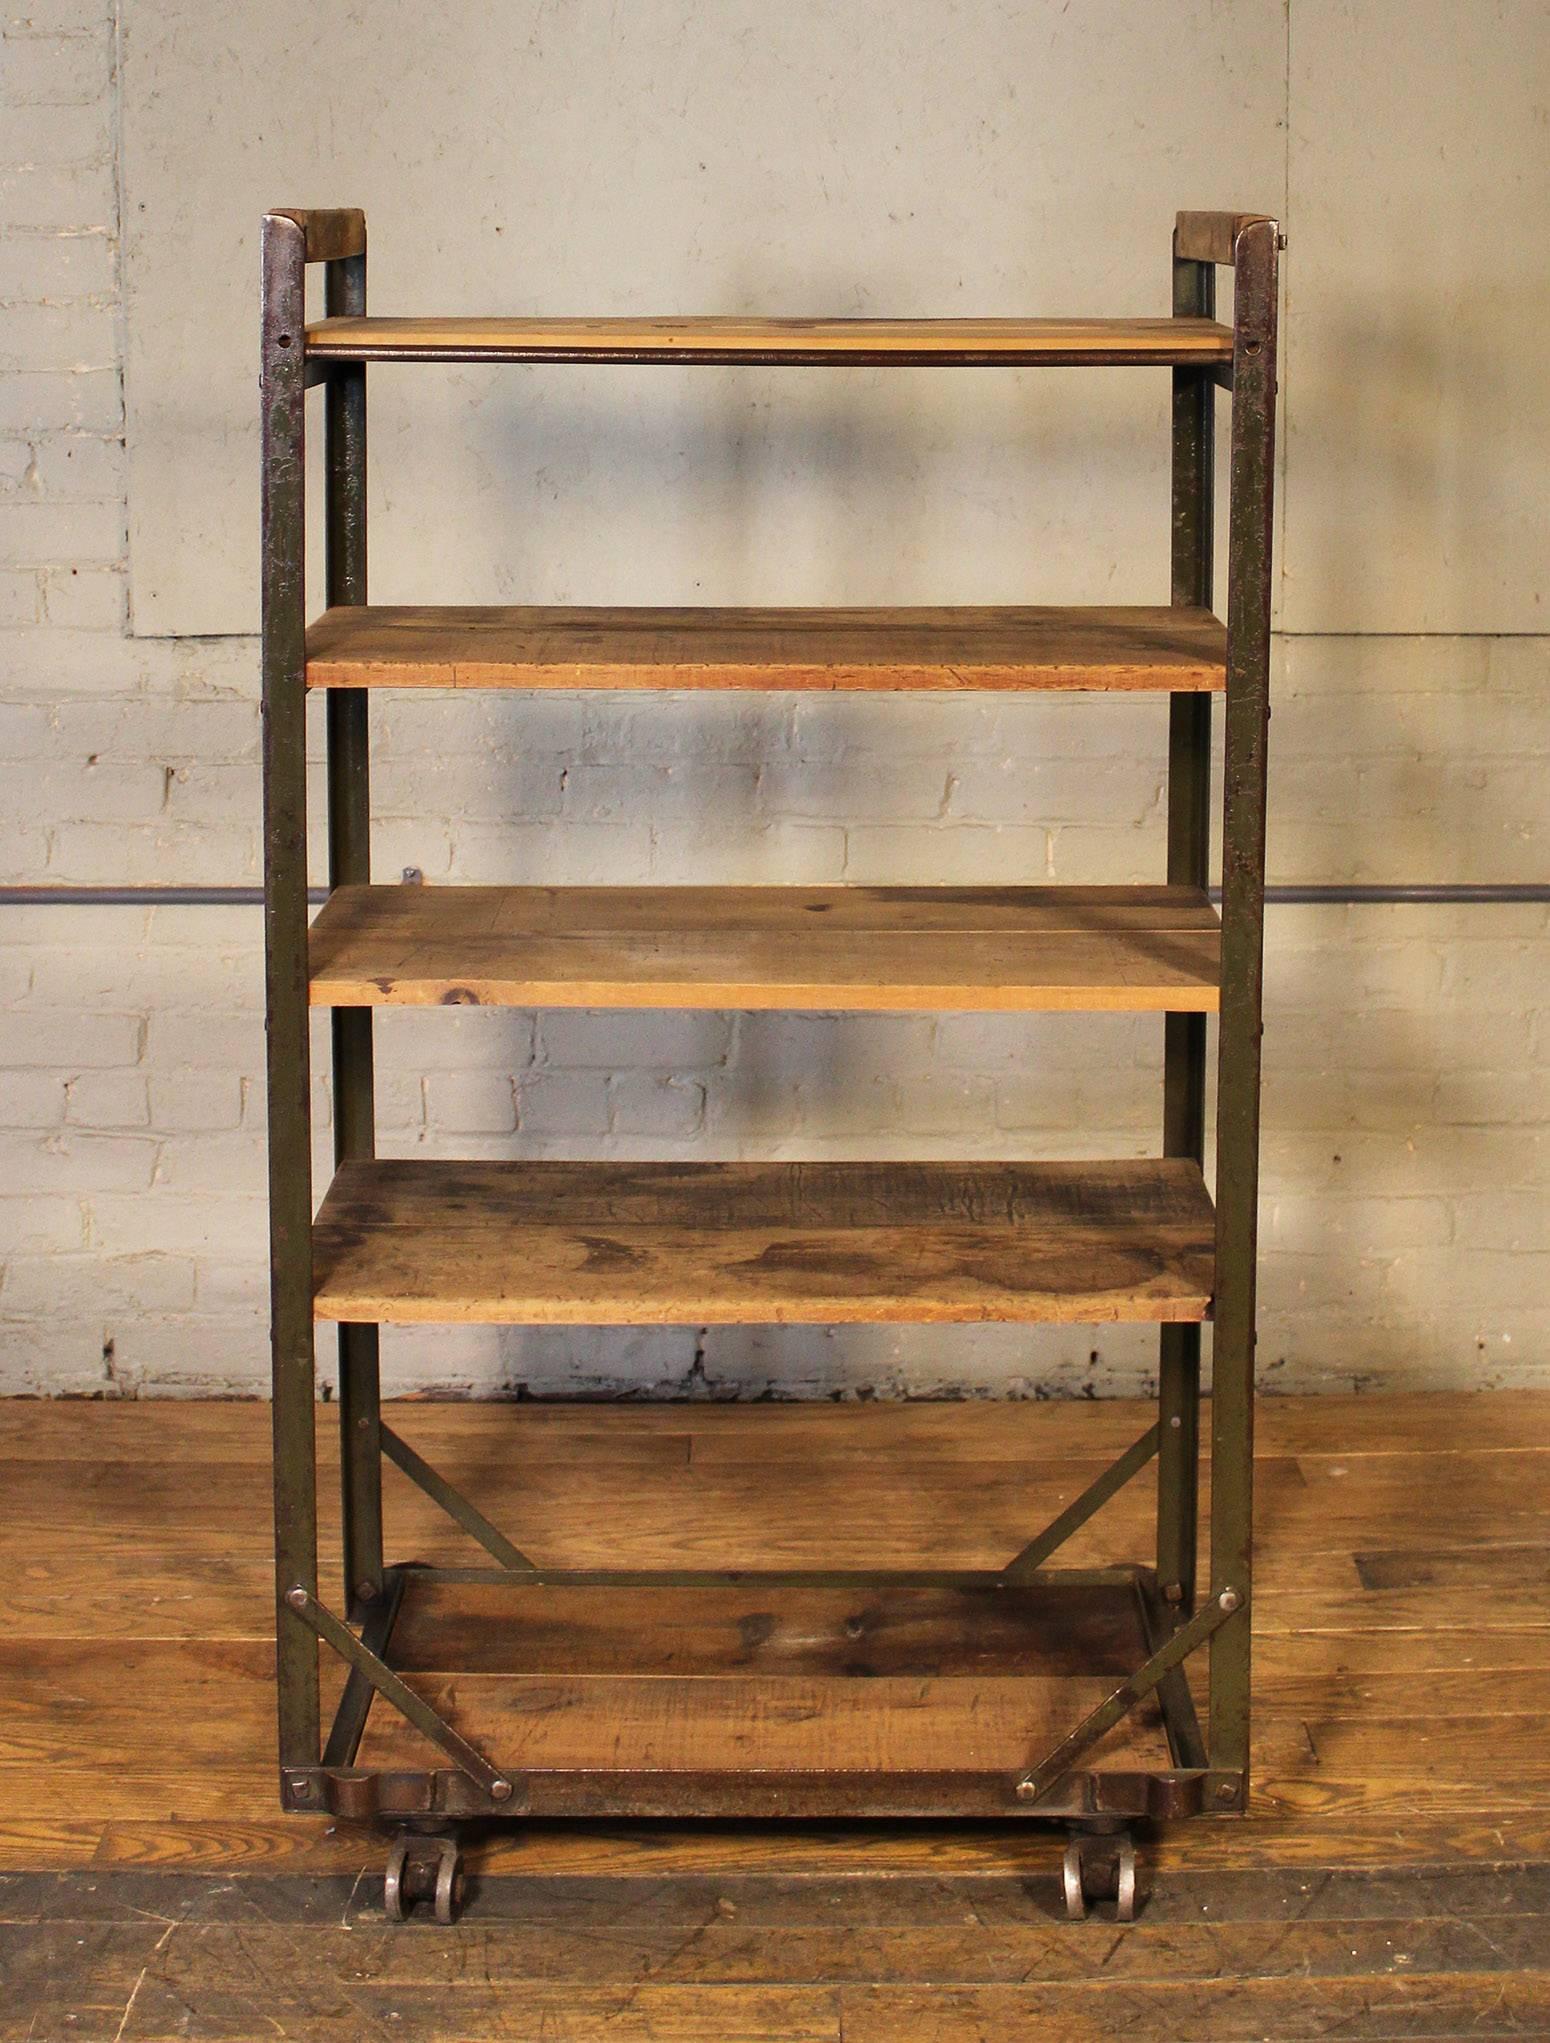 20th Century Rolling Shoe Cart, Rustic Wood and Steel Storage Rack